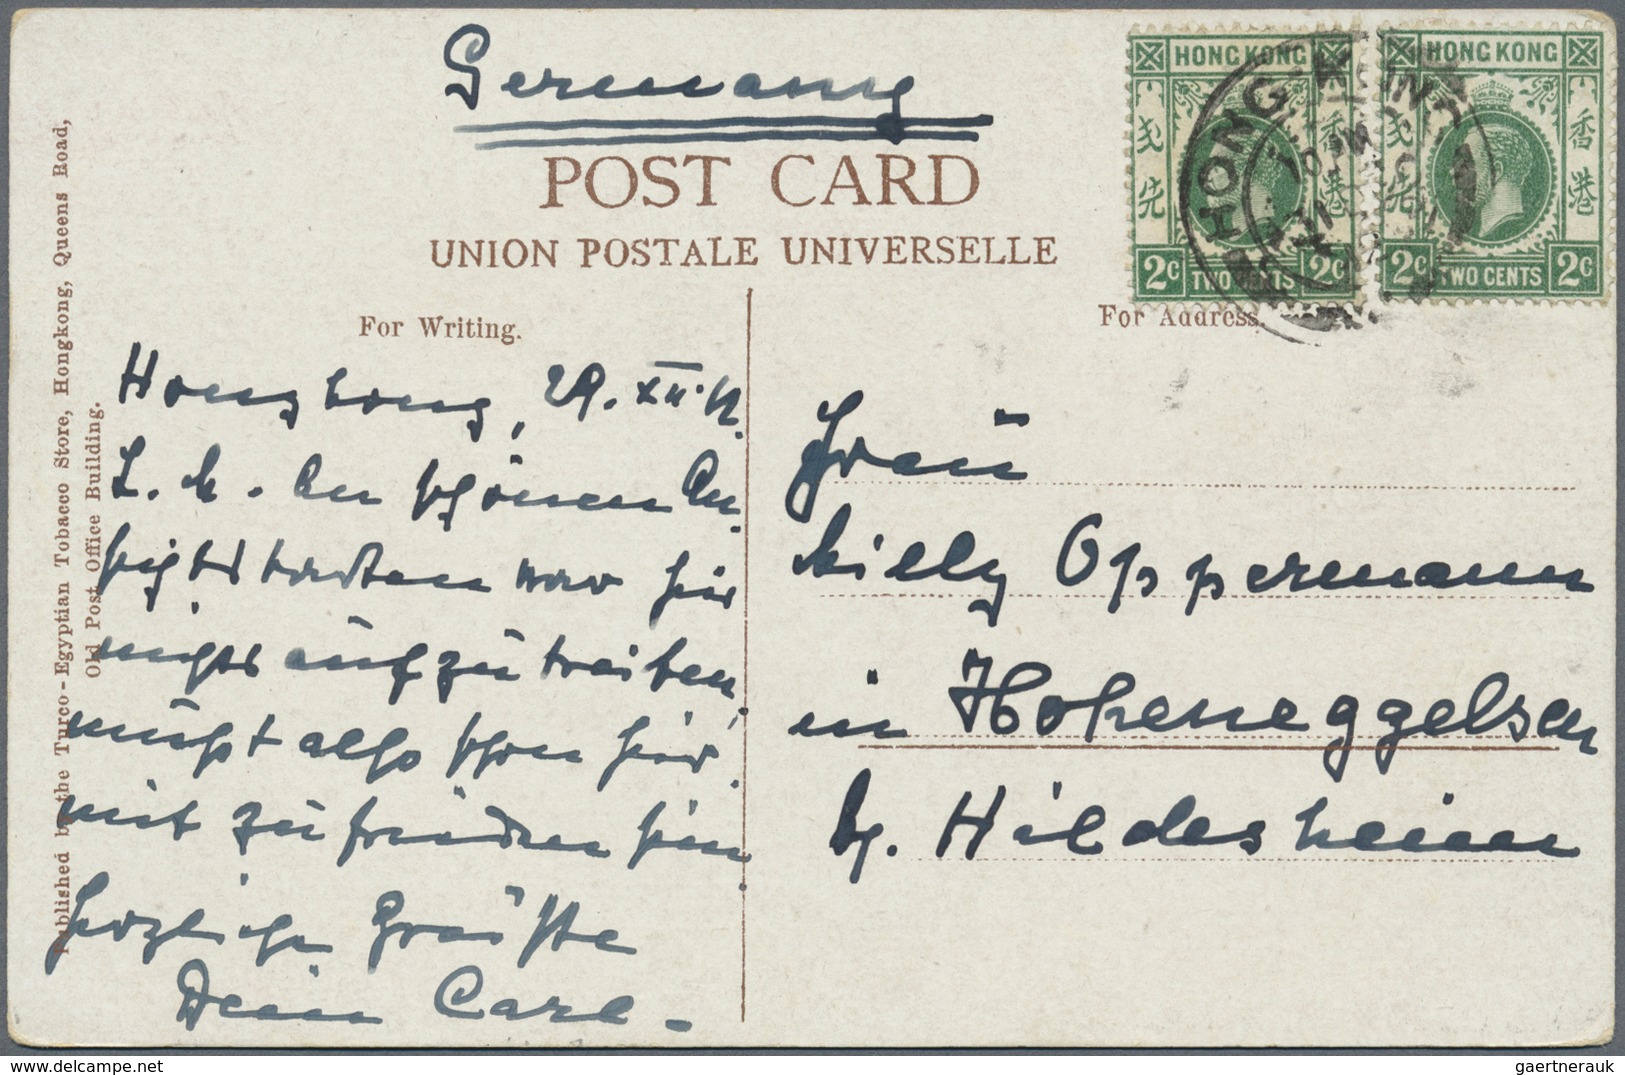 /Br/O China: 1898/1923 (ca.), used ppc (7) and HK name card size envelope marked "T" used to Germany, Shan